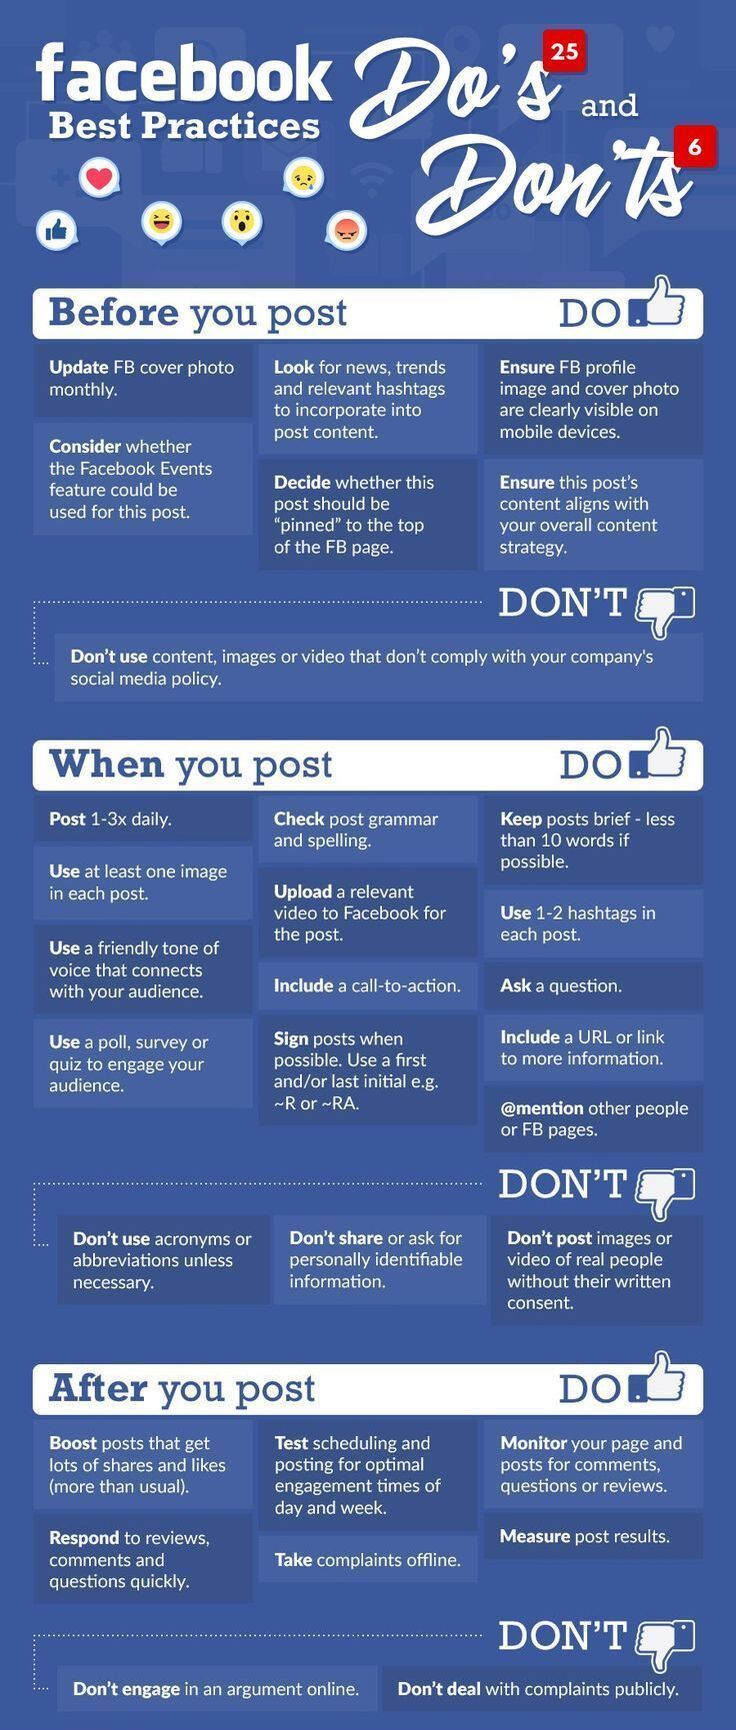 Facebook do's and don'ts